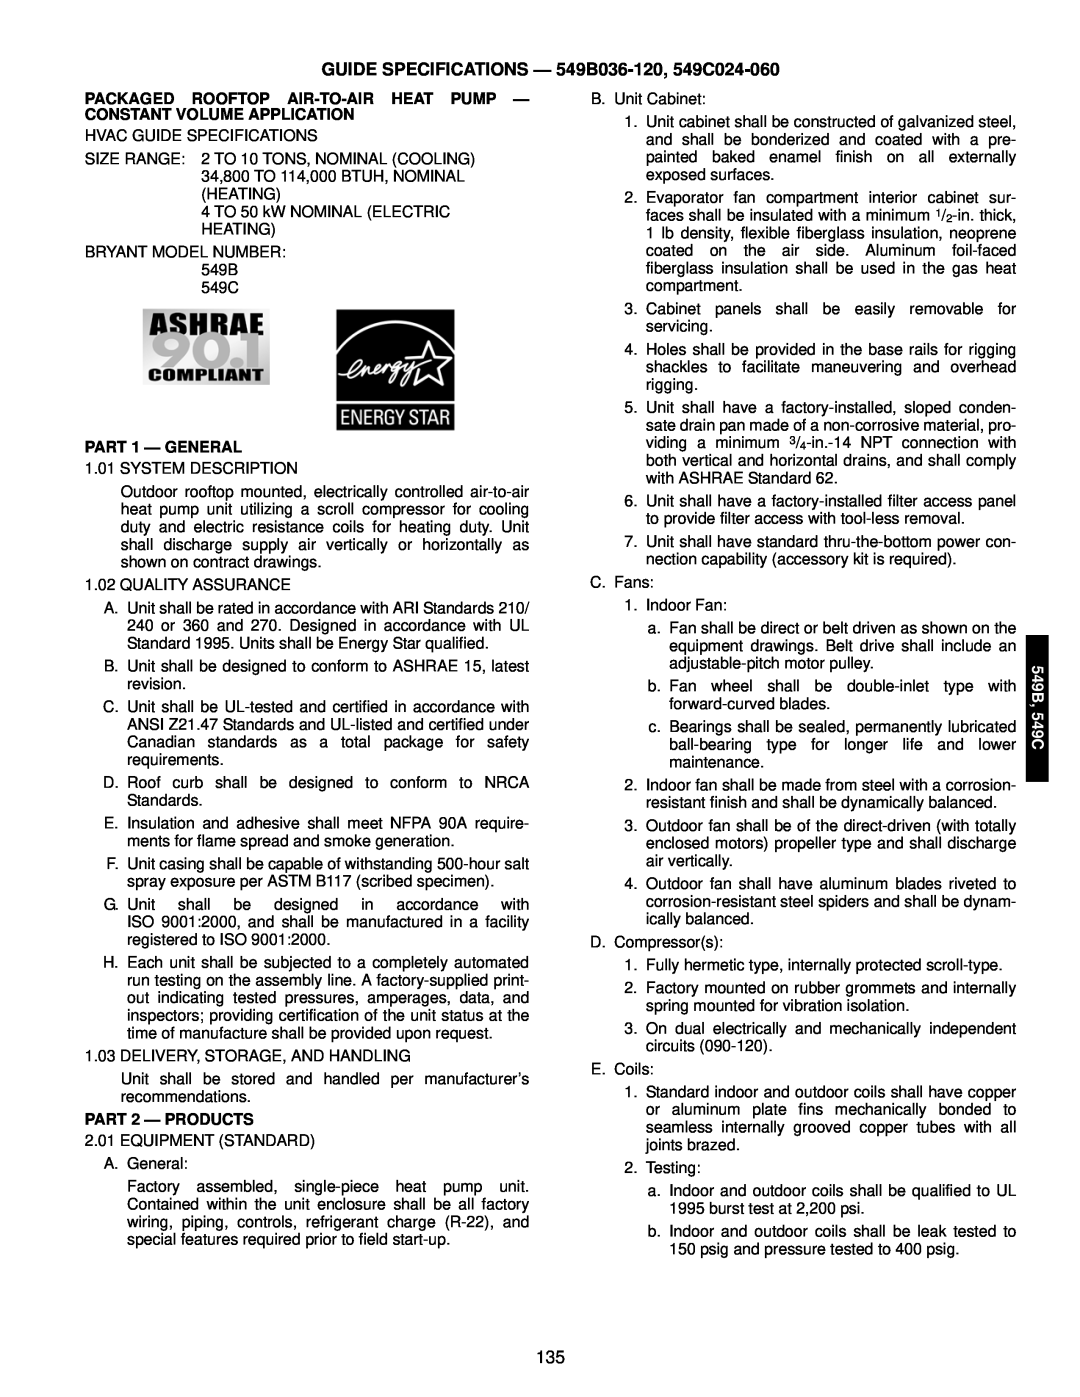 Bryant manual GUIDE SPECIFICATIONS — 549B036-120, 549C024-060, PART 1 — GENERAL, PART 2 — PRODUCTS, 549B, 549C 